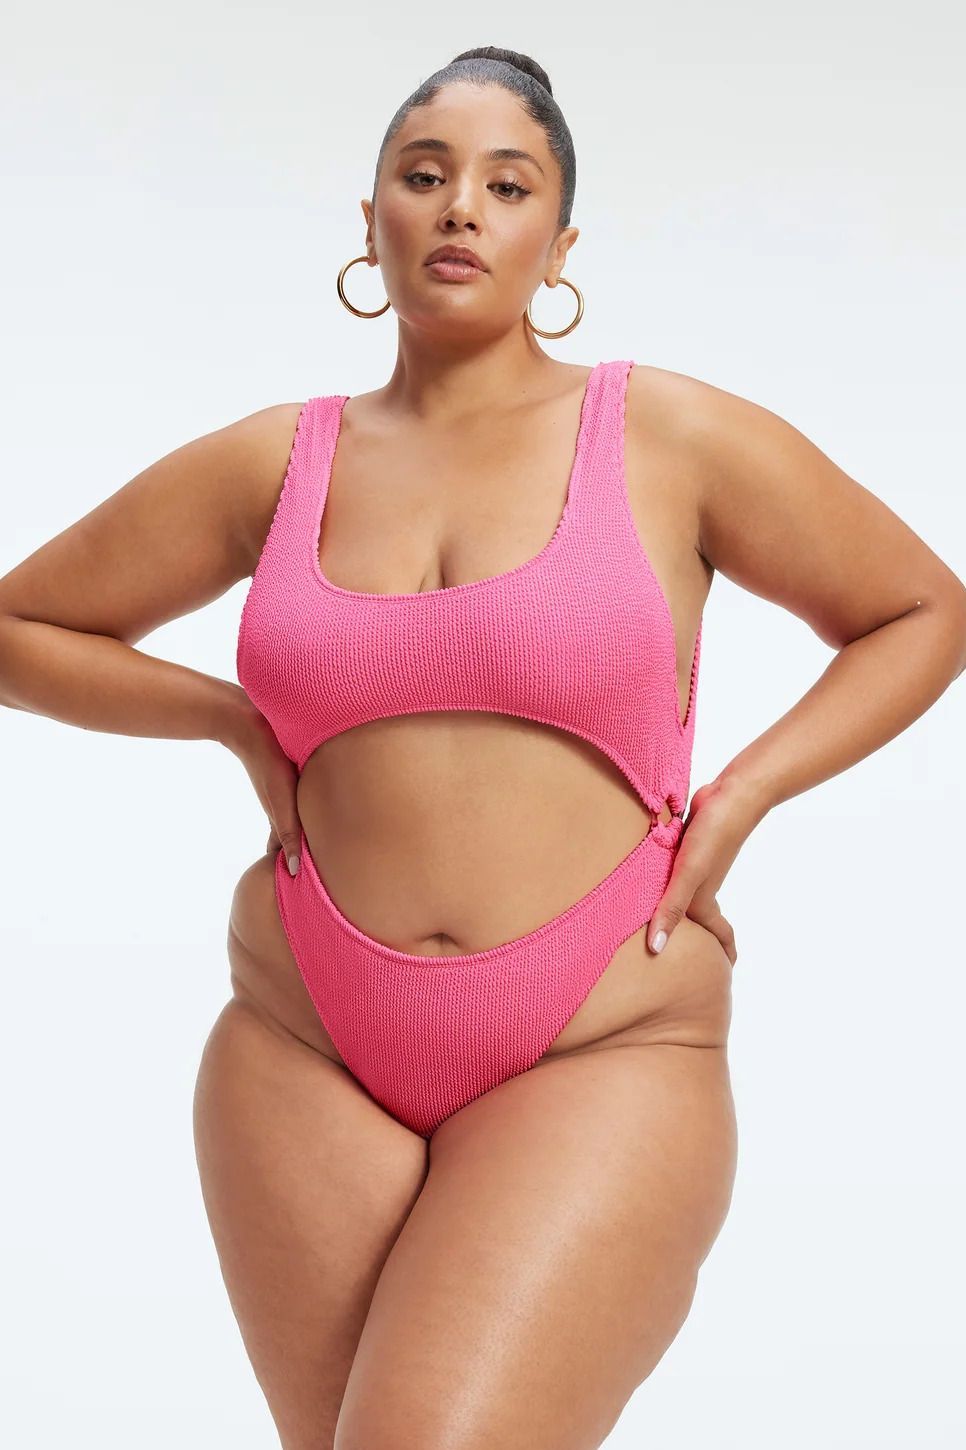 cameron poe recommends Sexy Swimsuits For Curvy Women